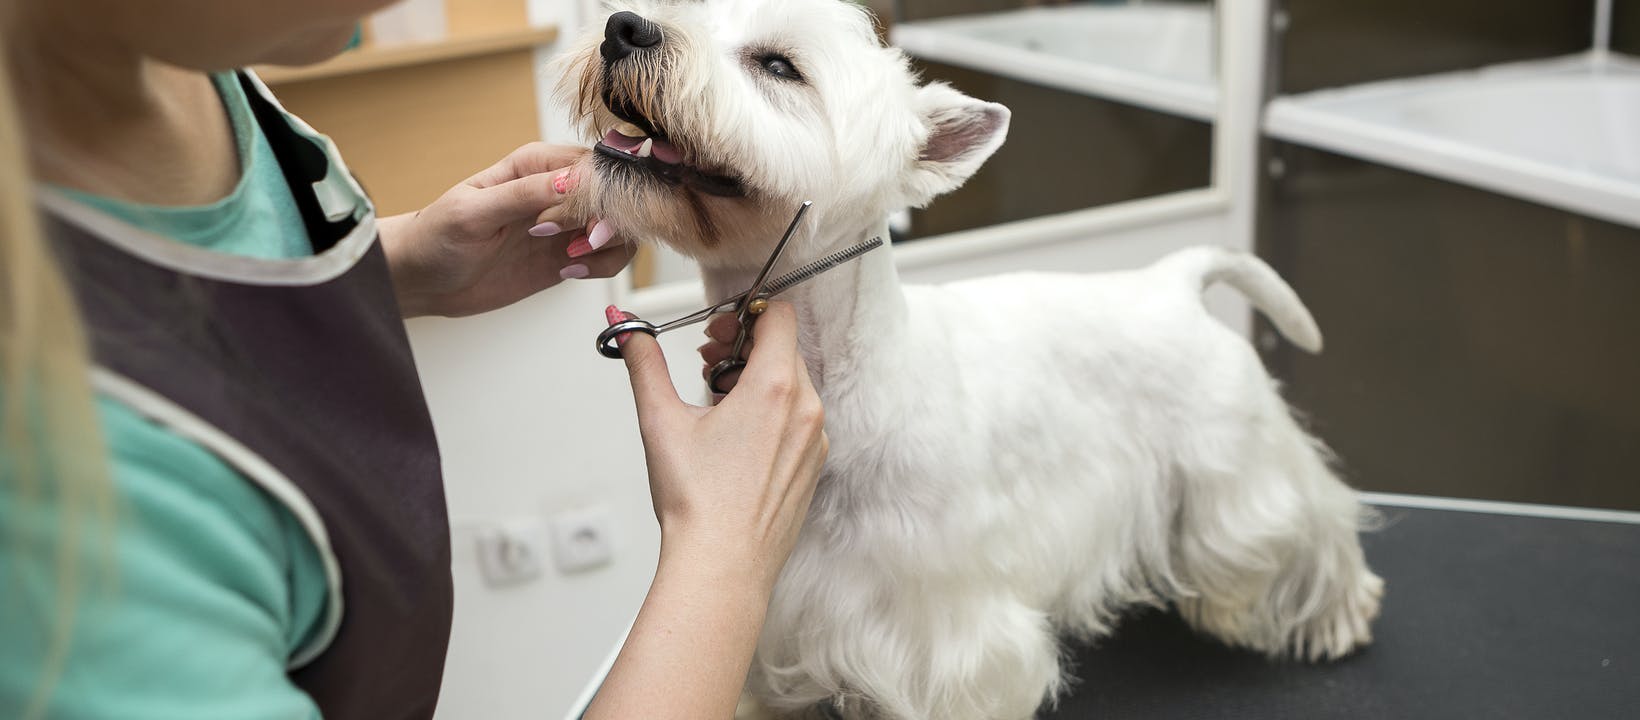 Miami Dog Grooming Tips and Strategies for You